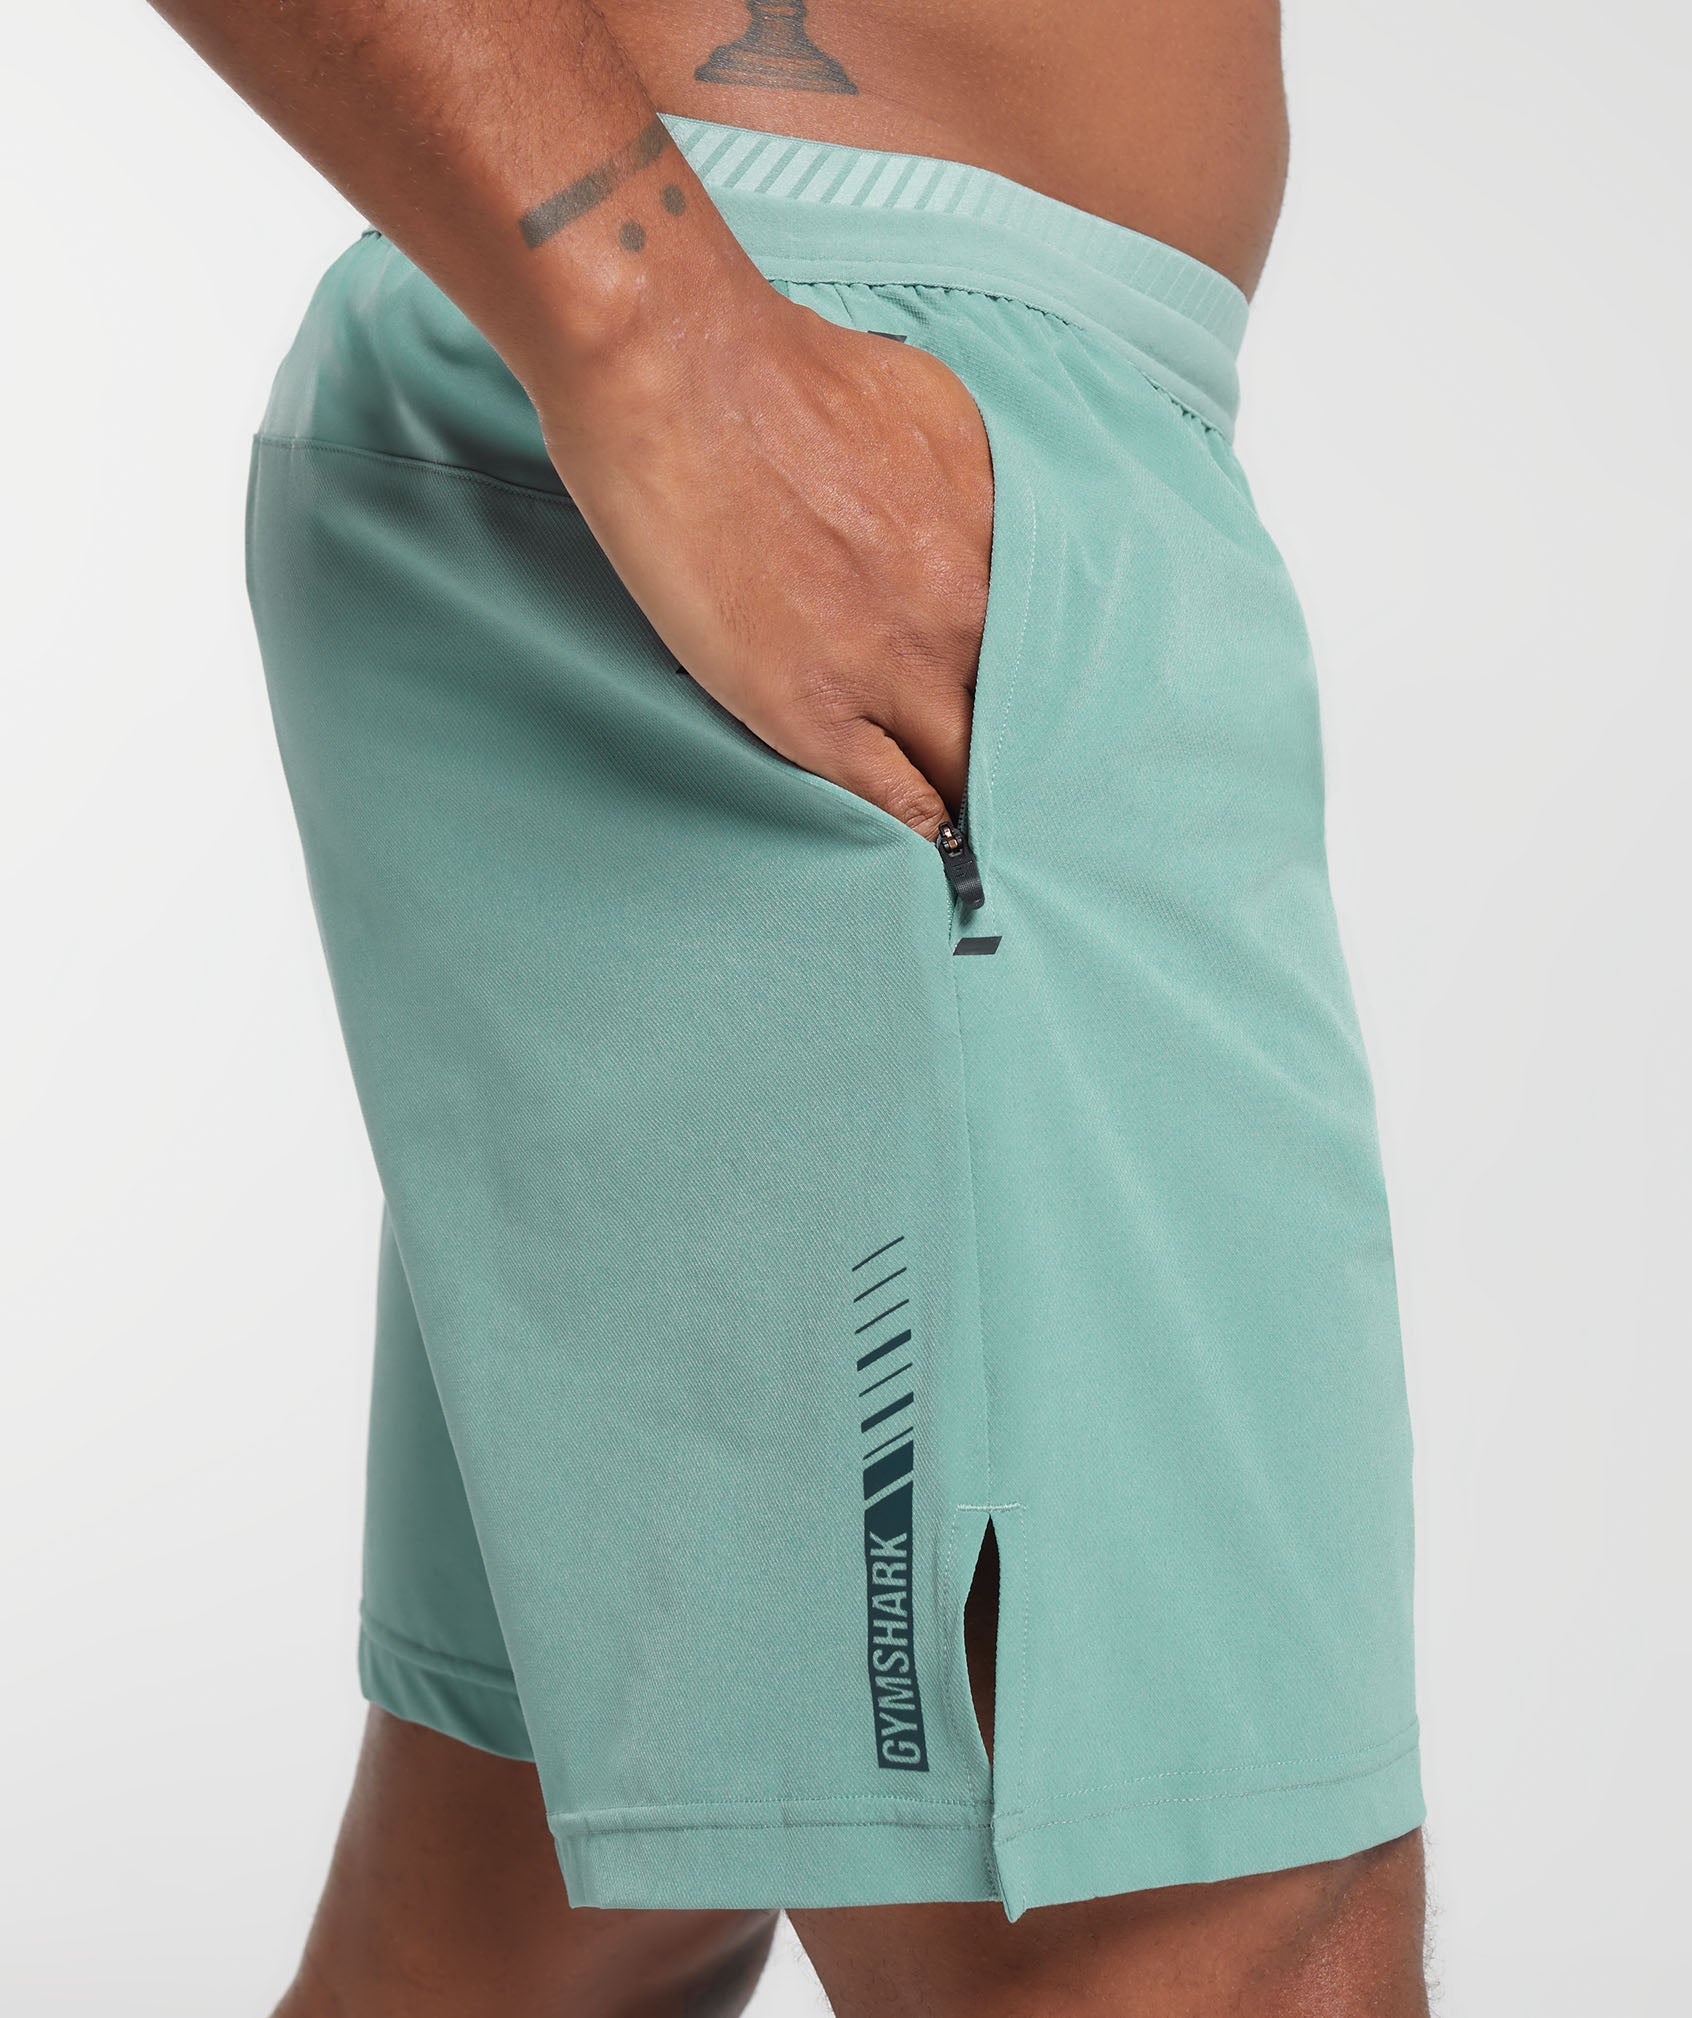 Apex 7" Hybrid Shorts in Duck Egg Blue - view 6